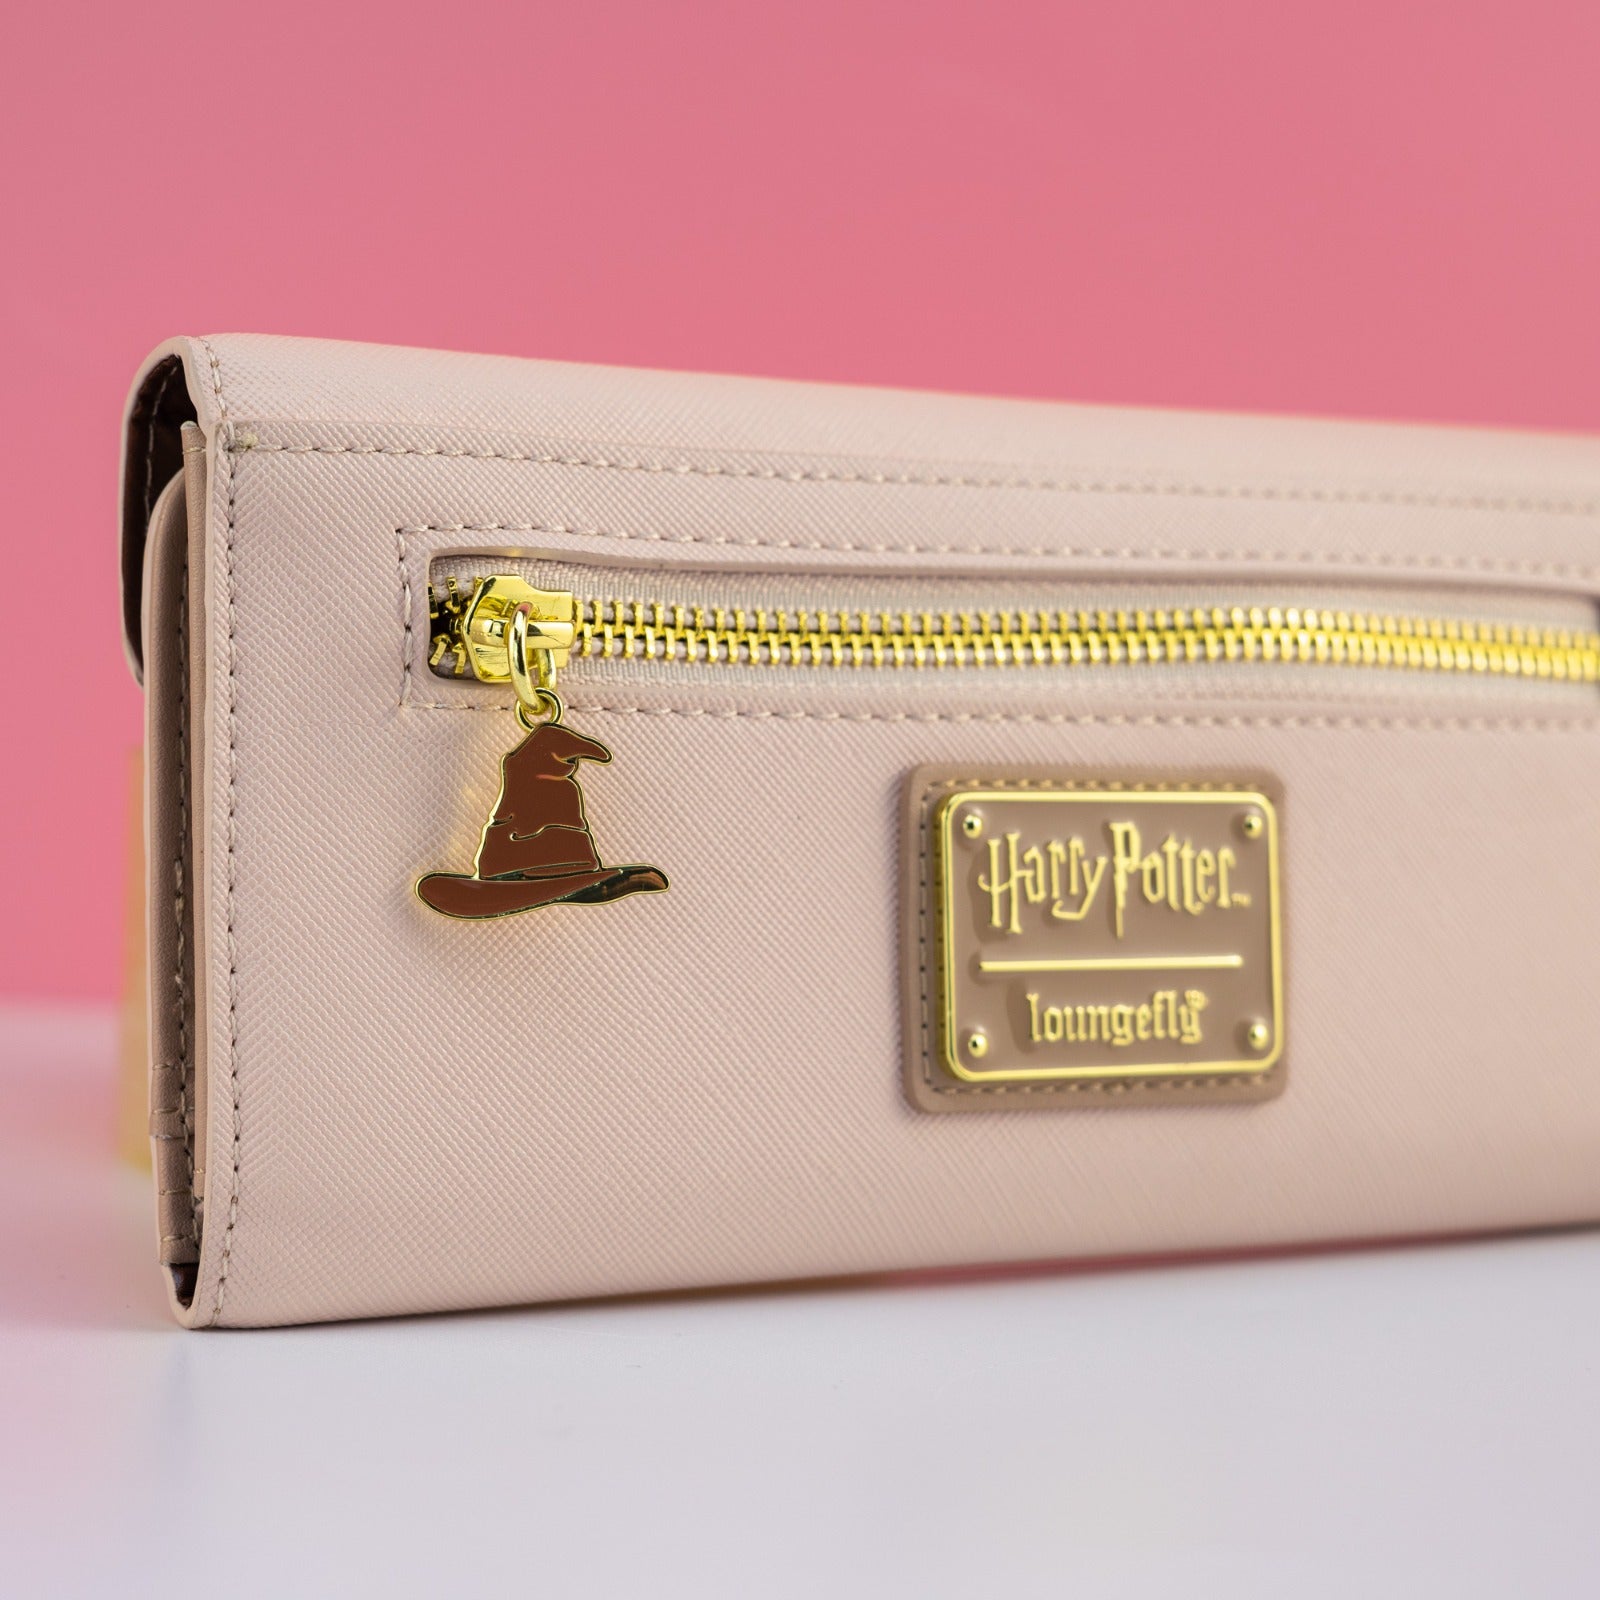 Loungefly x Harry Potter Pink Elder Wand Mini Backpack